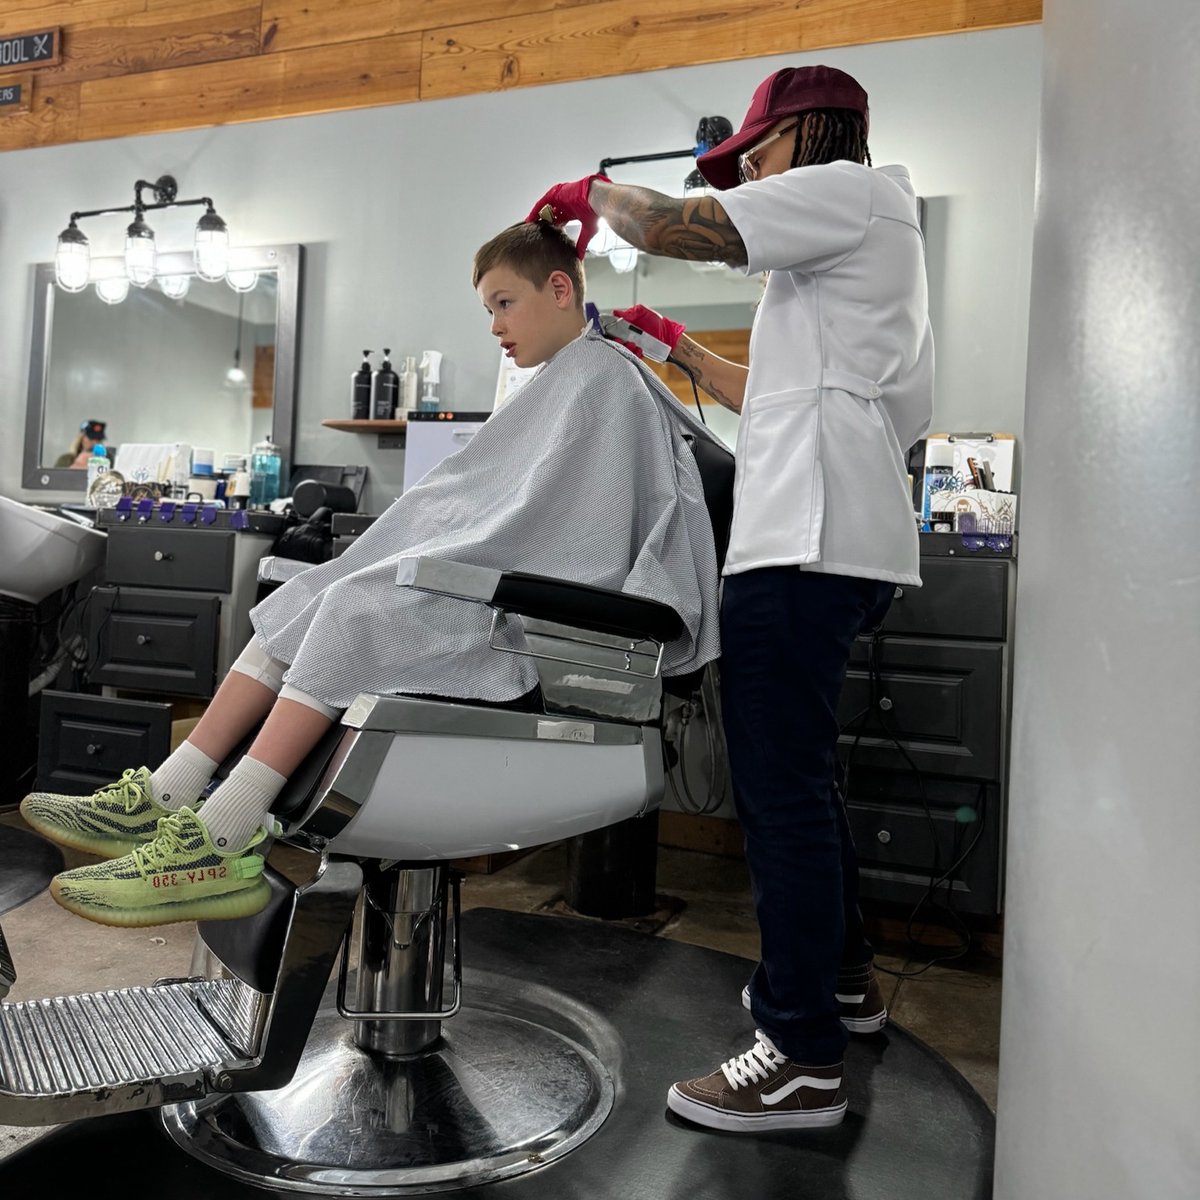 Come get your kids fresh for school! Book in bio 💈

#sharpfade #barberconnect #fadehaircut #mensfashion #haircuts #barberstyle #hairdresser #menstyle #haircolor #faded #barbero #barberpost #fadegame #taper #beauty #barbeiro #fades #wahlpro #men #barbersince